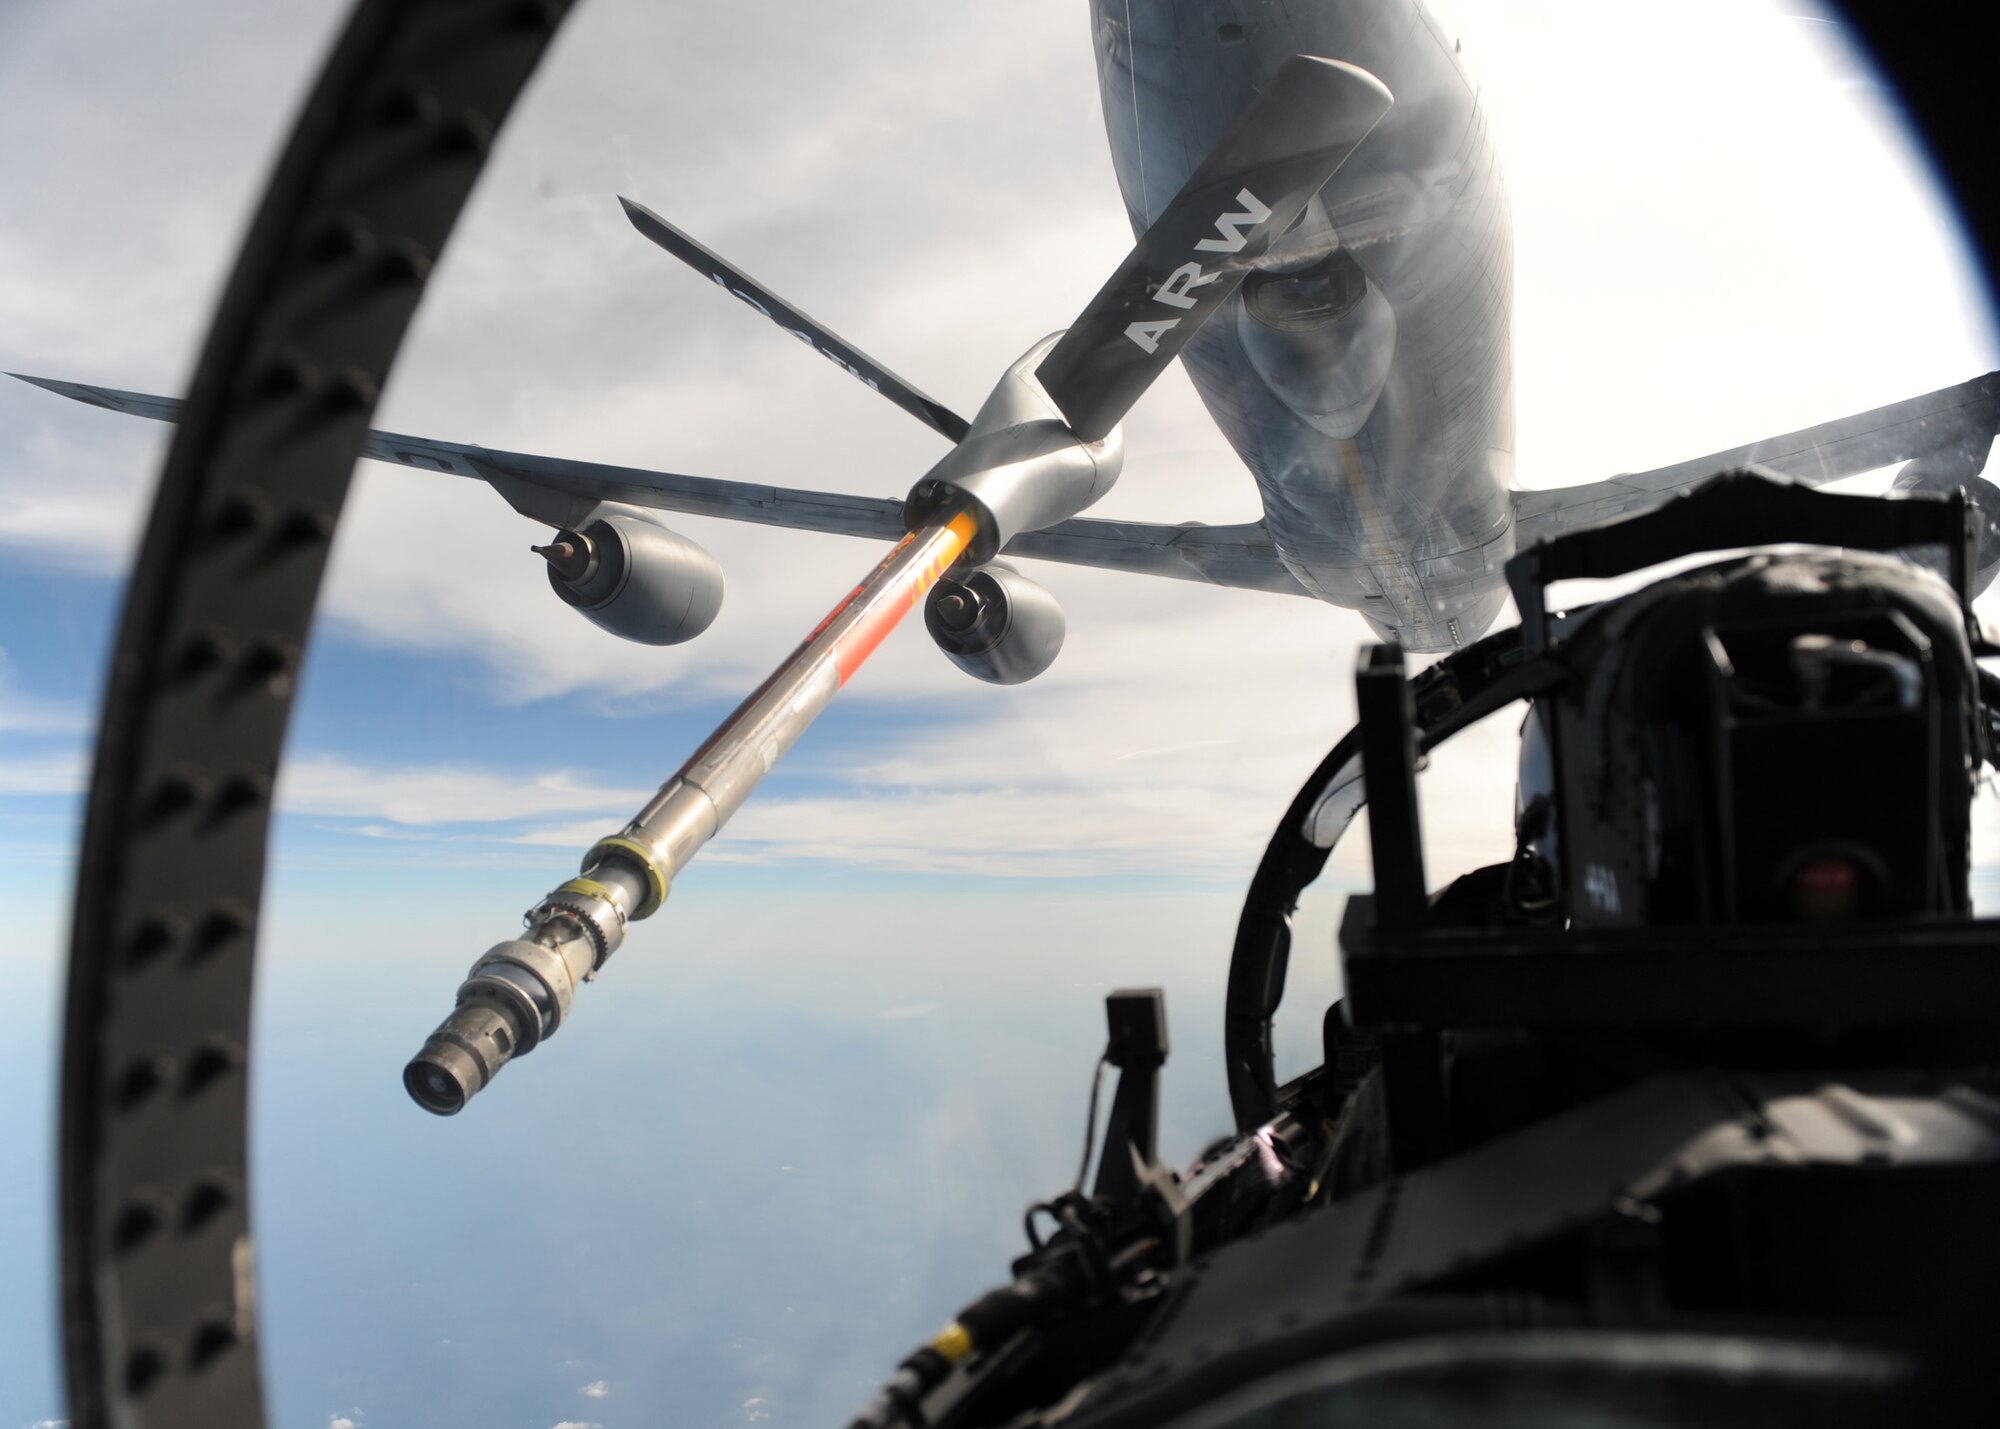 An F-15E Strike Eagle connects with a KC-135 Stratotanker from the 134th Air Reserve Wing for a refuel during a Combat Hammer mission Feb. 3.  Combat Hammer is an Air-to-Ground Weapons System Evaluation Program controlled by the 86th Fighter Weapons Squadron.  The F-15s from Seymour Johnson AFB, N.C., participated in the week-long evaluation dropping GPS and laser-guided weapons.  The WSEP was the first evaluation of Small Diameter Bombs at Eglin and first evaluation of Laser Joint Direct Attack Munitions in a Combat Hammer.  The WSEP program, run by the 53d Weapons Evaluation Group, is used to evaluate the effectiveness and suitability of combat air force weapon systems. The evaluations are accomplished during tactical deliveries of fighter, bomber and unmanned aerial system precision guided munitions, on realistic targets with air-to-air and surface-to-air defenses. For many of the aircrew participating in WSEP, it is the first time employing live weapons. This provides a level of combat experience many units face during combat.  (U.S. Air Force photo/Maj. Scott Alford.)